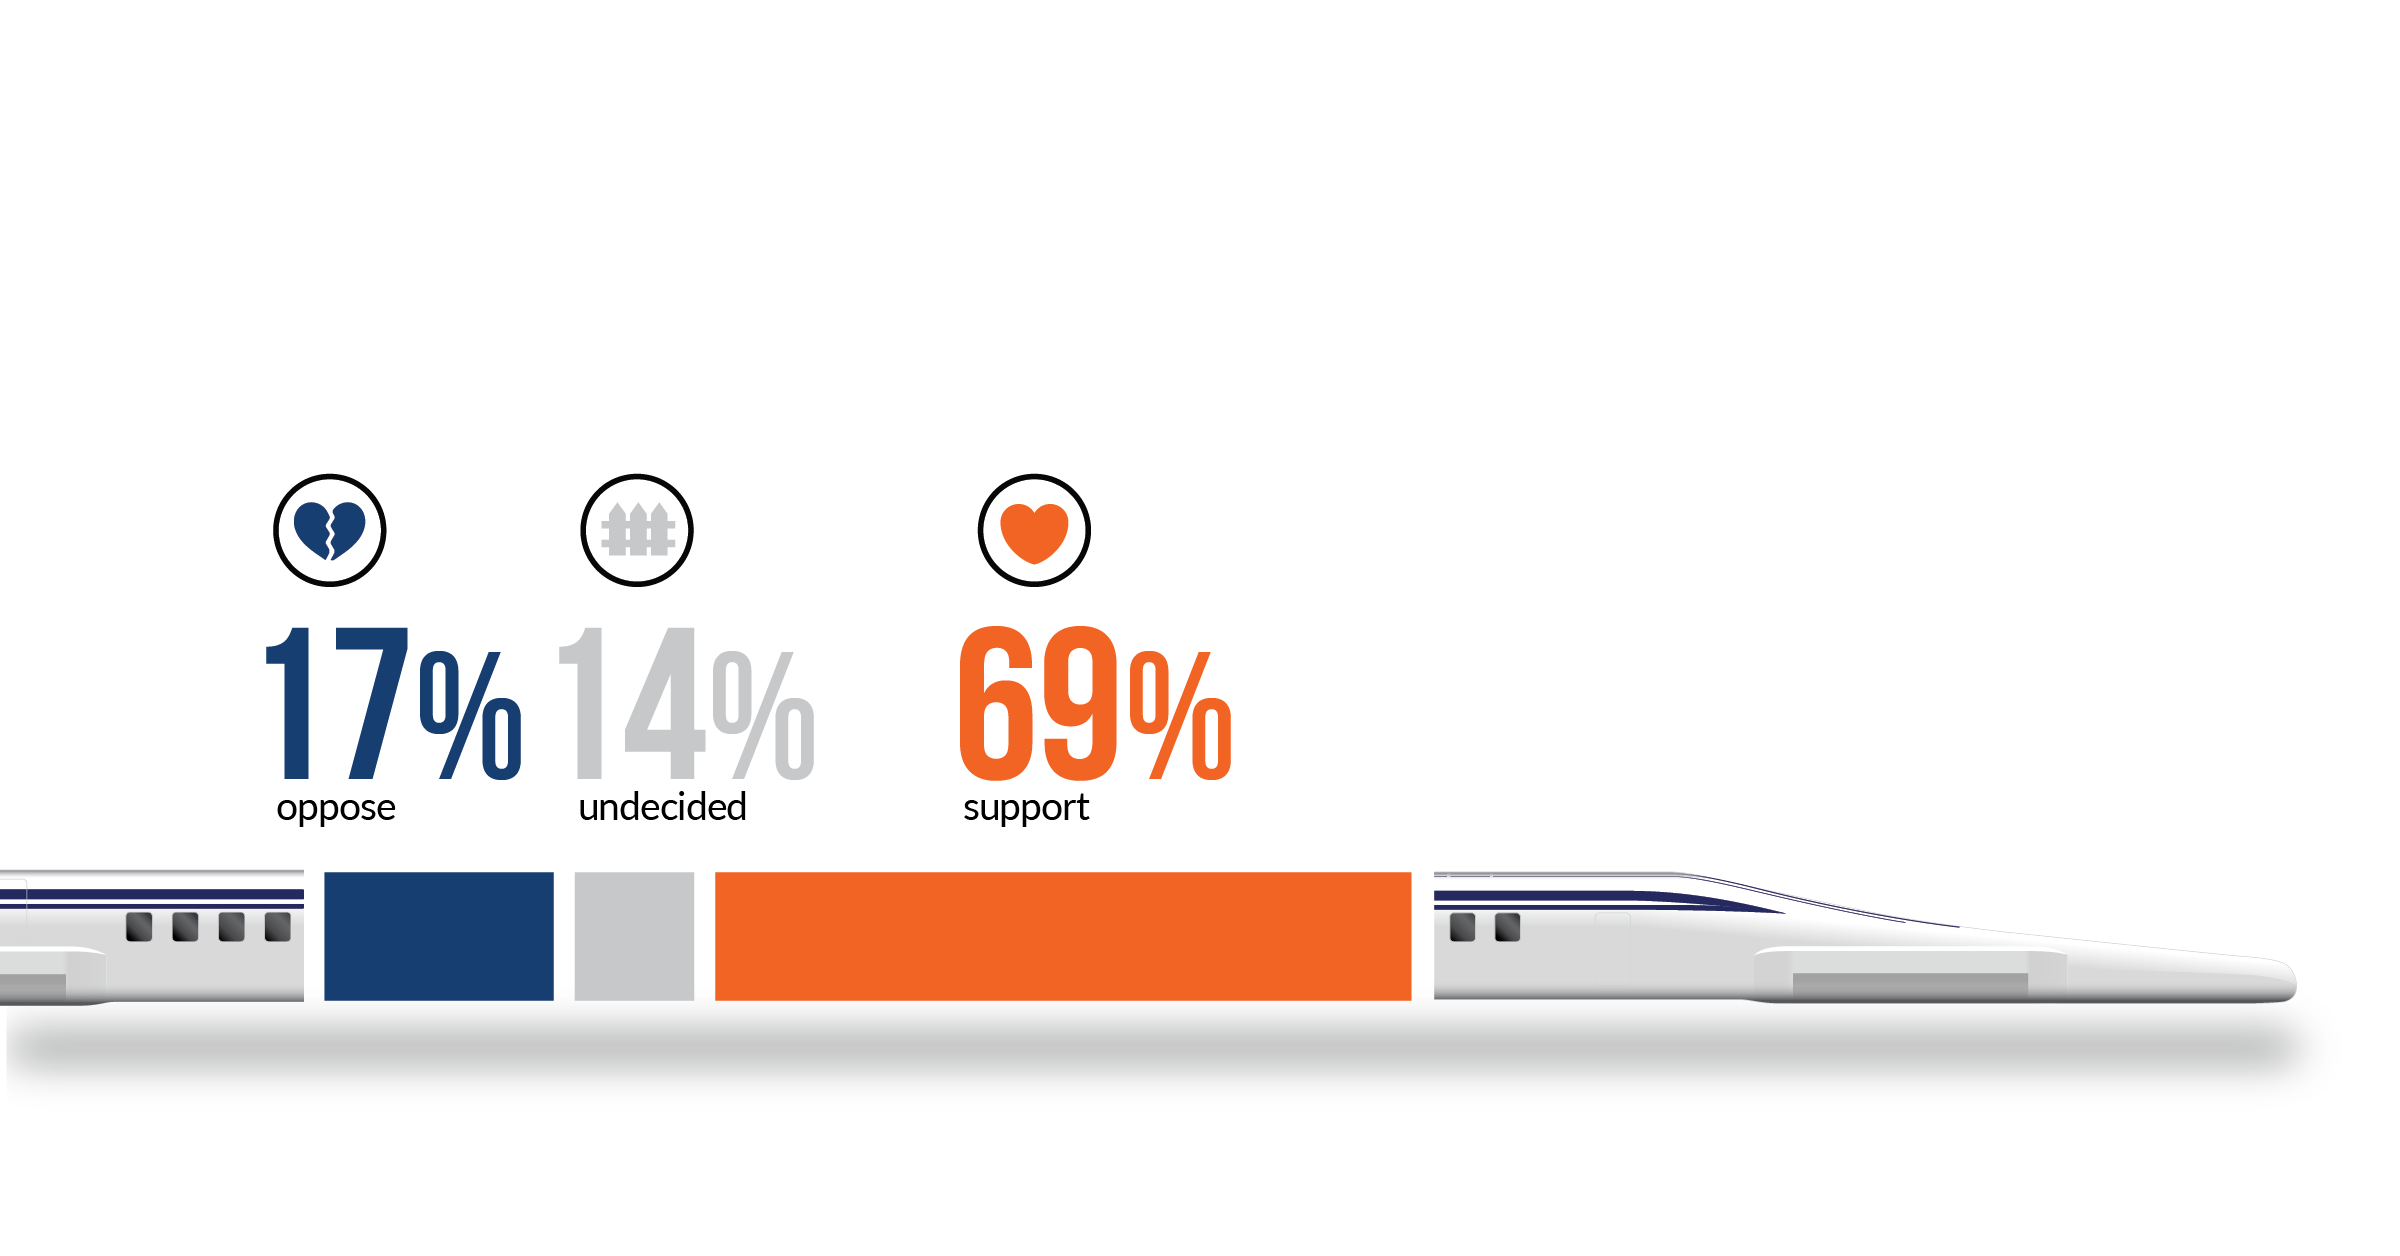 Infographic showing 69% support for Northeast Maglev project in Anne Arundel County